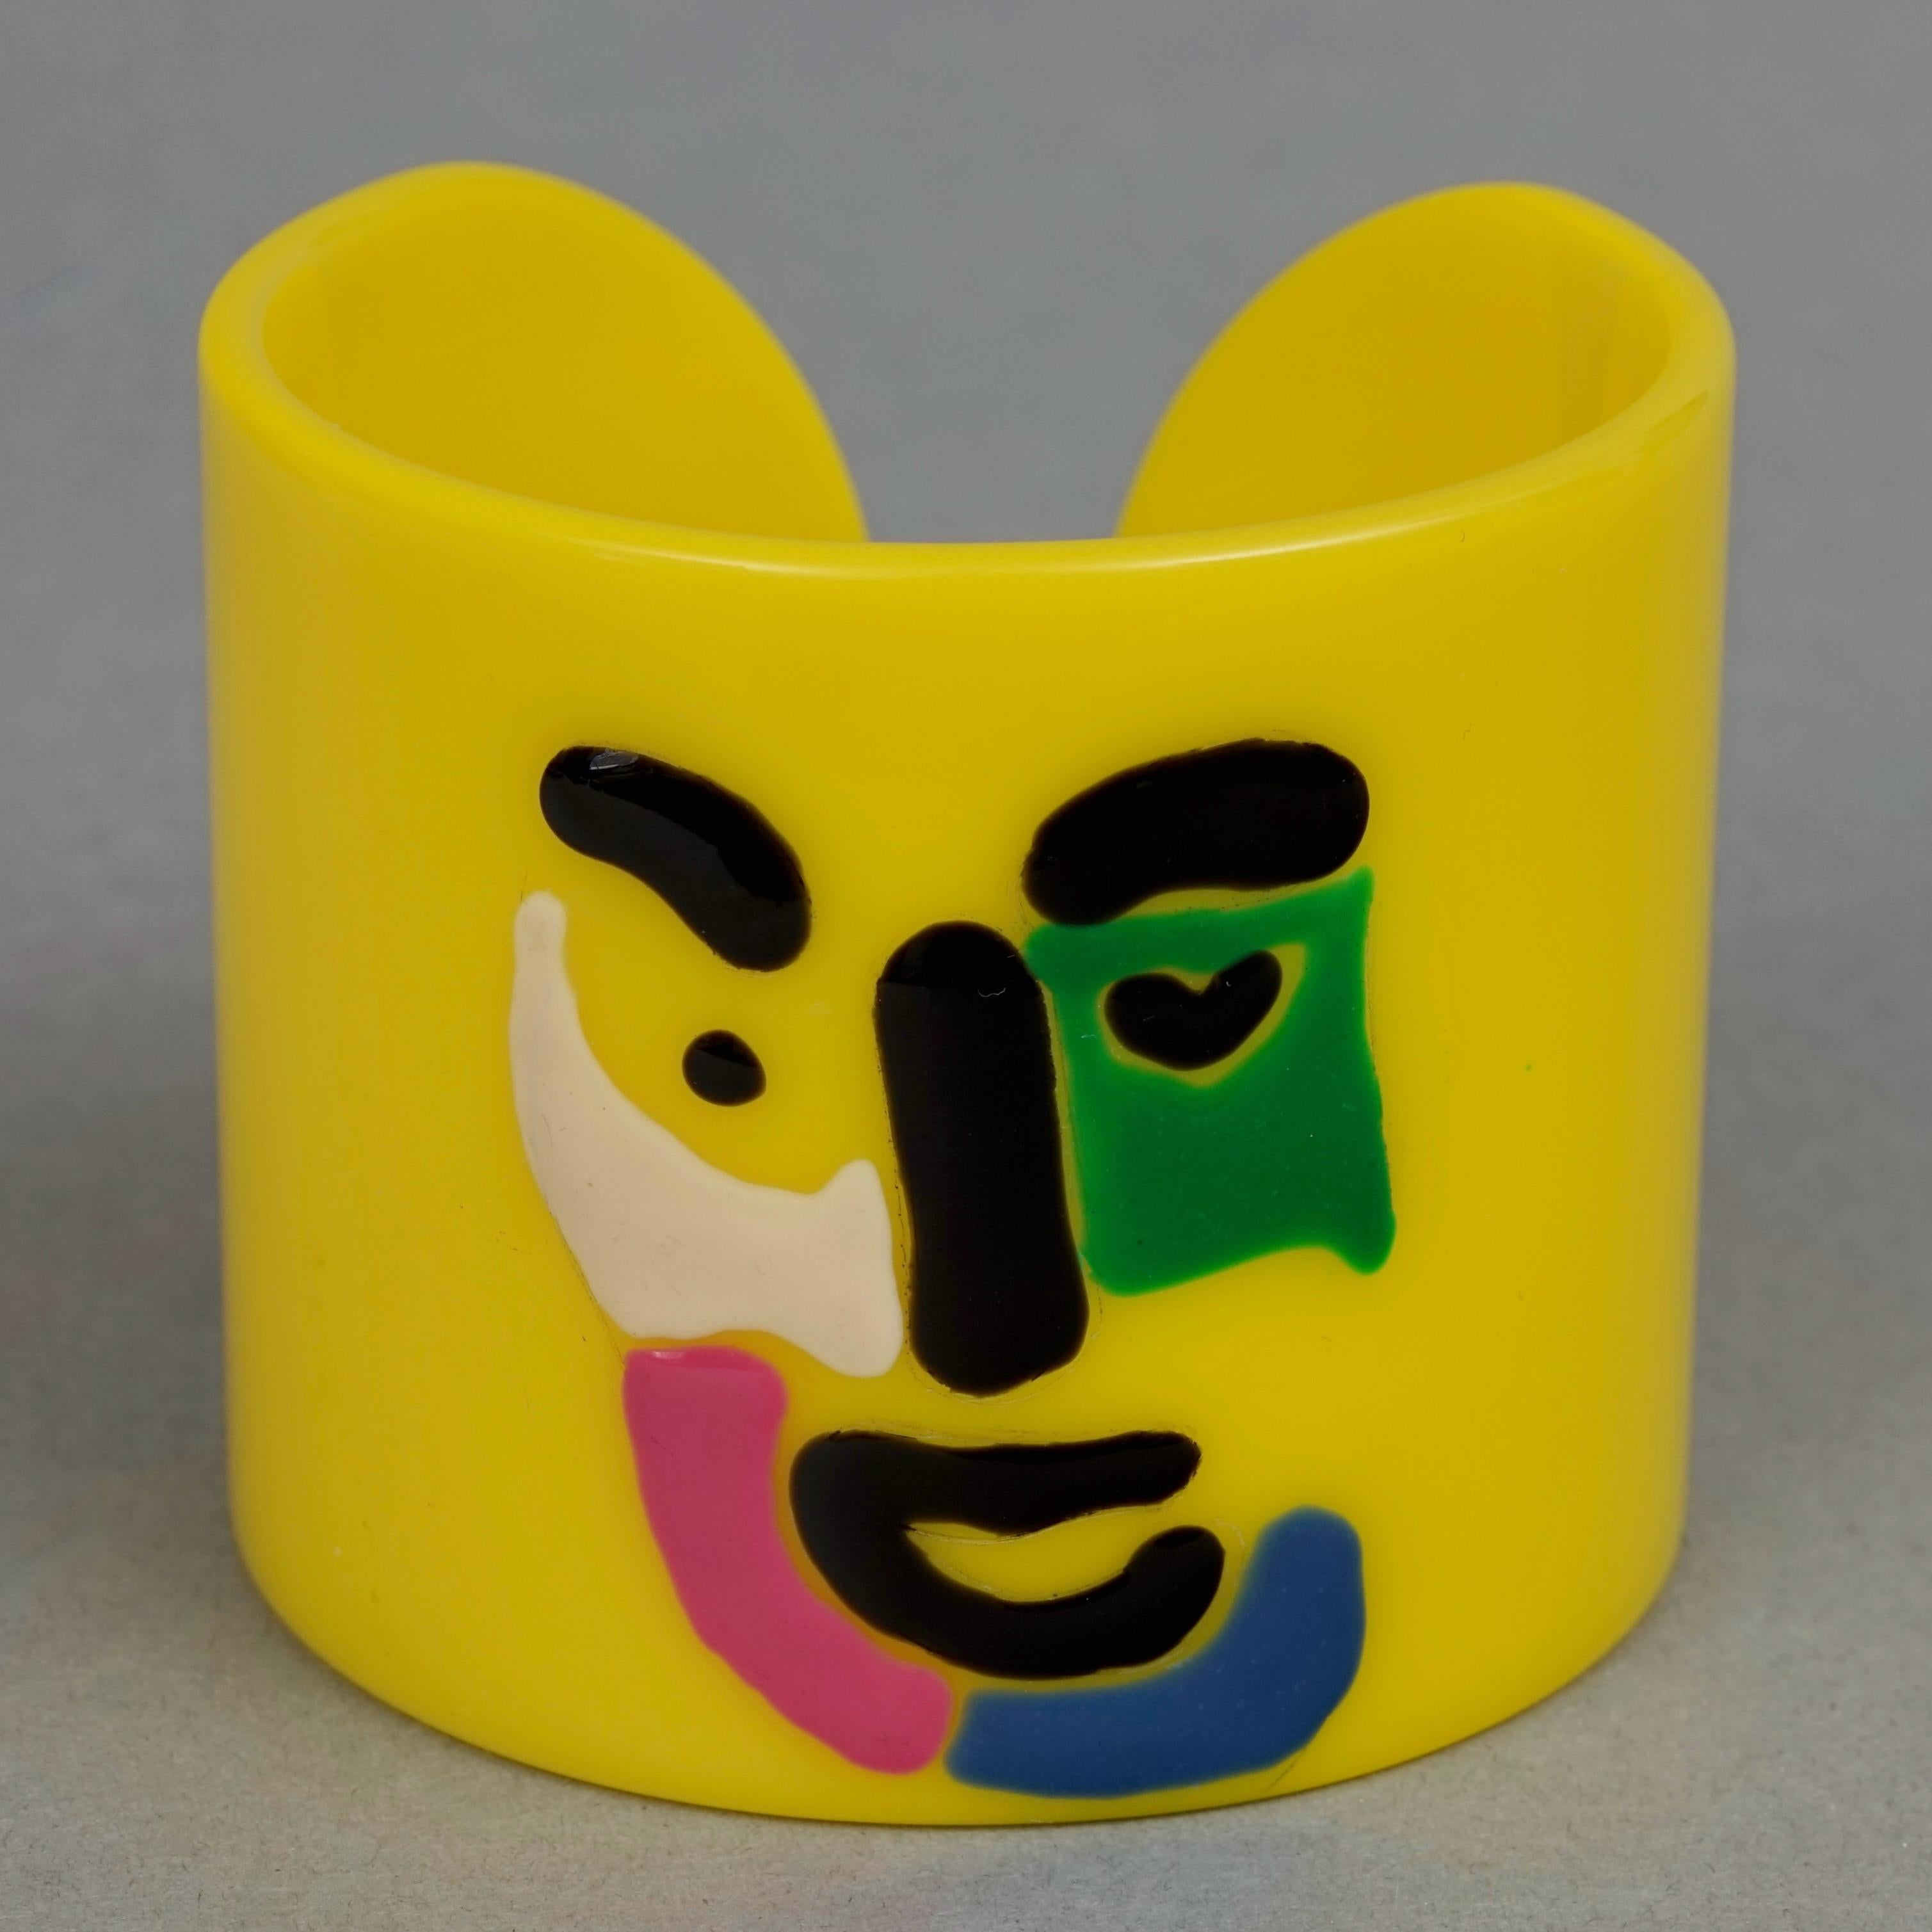 Vintage Picasso Abstract Yellow Lucite Cuff Bracelet 1